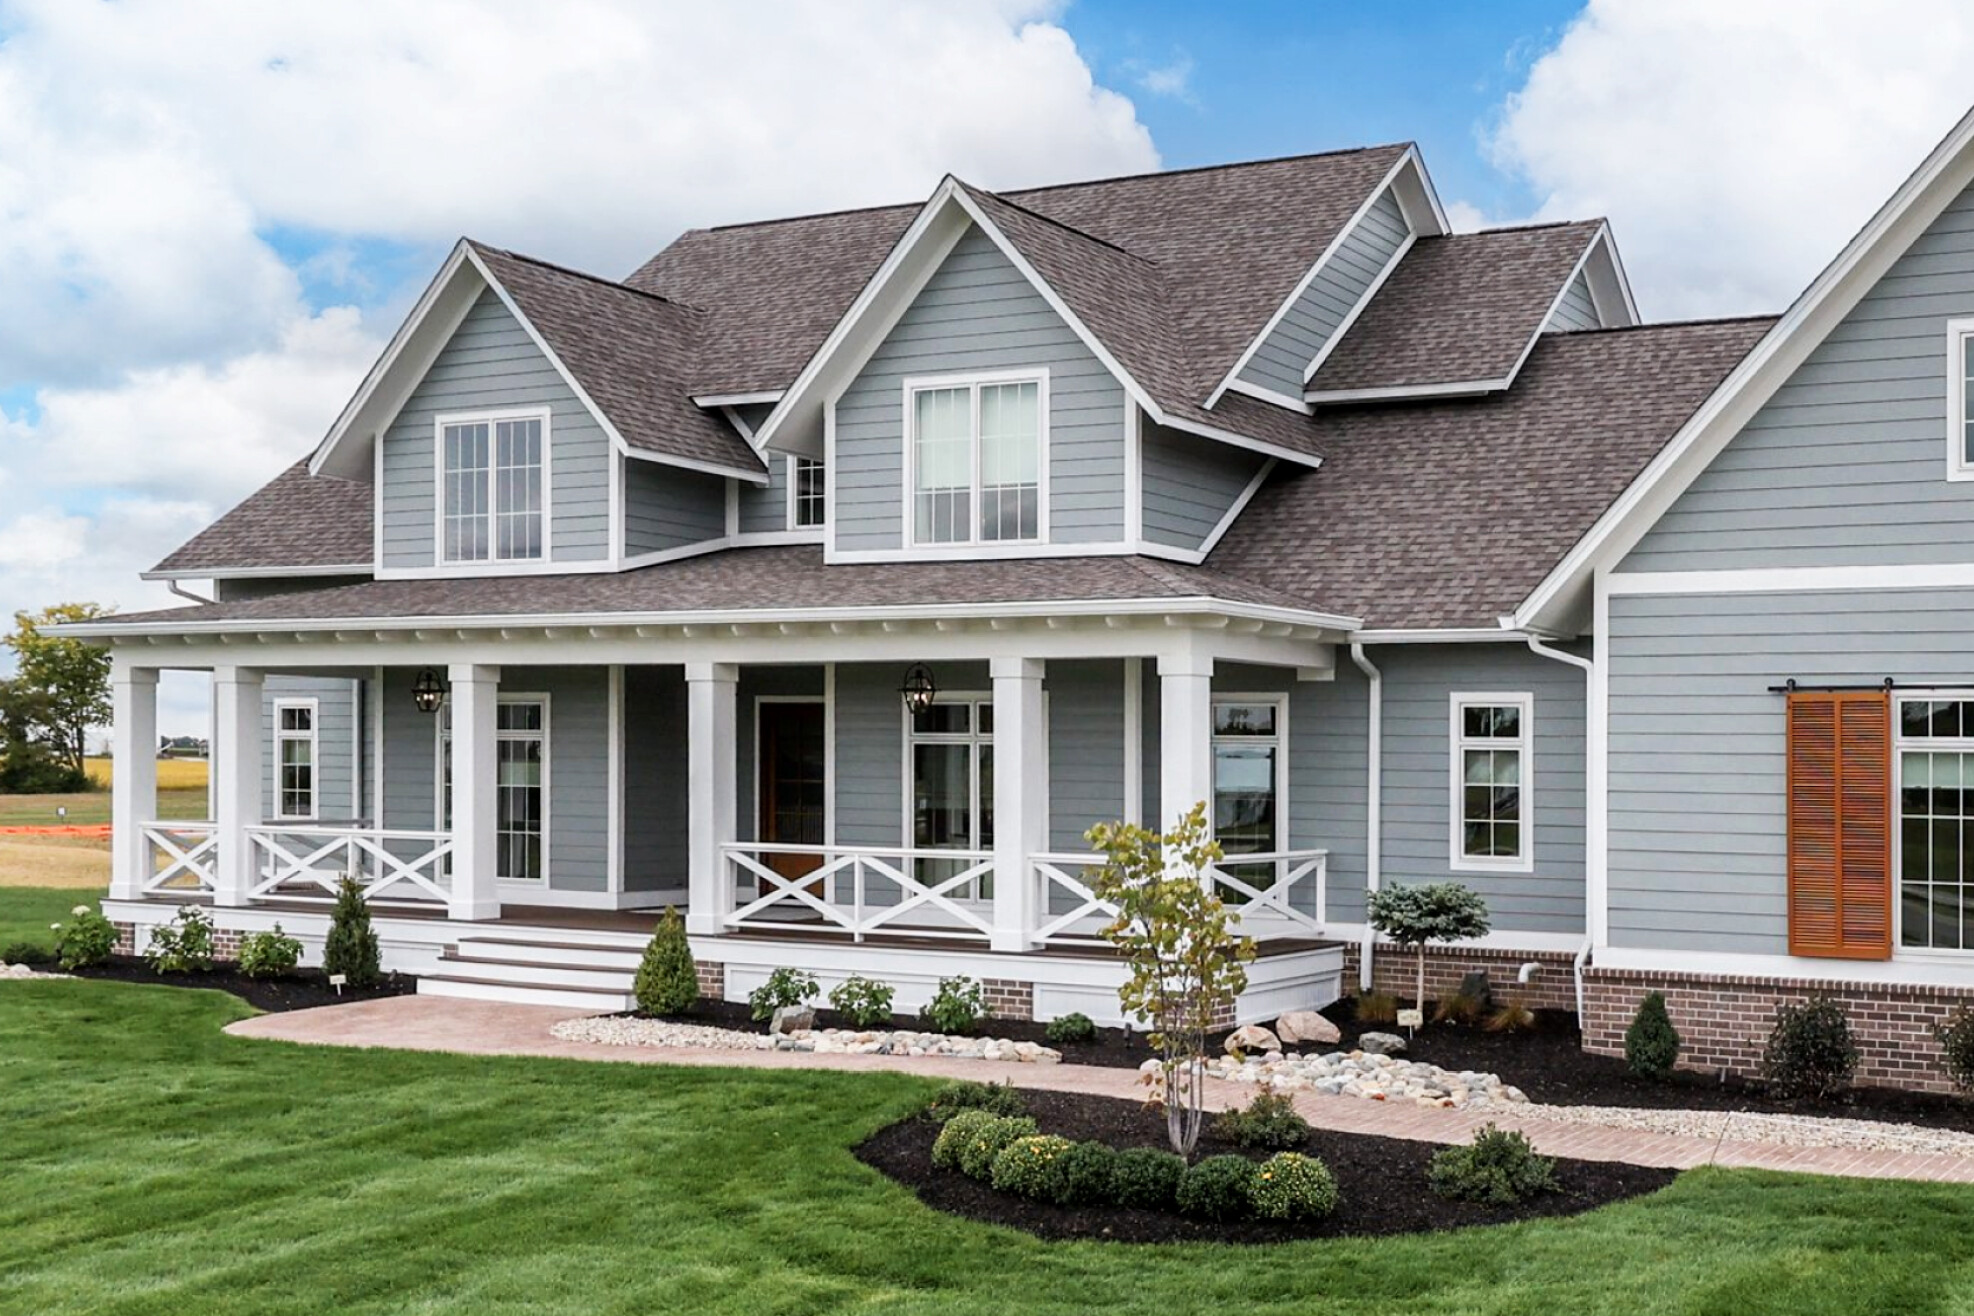 A custom home with gray siding and white trim, built by a reputable custom home builder in Carmel, Indiana.